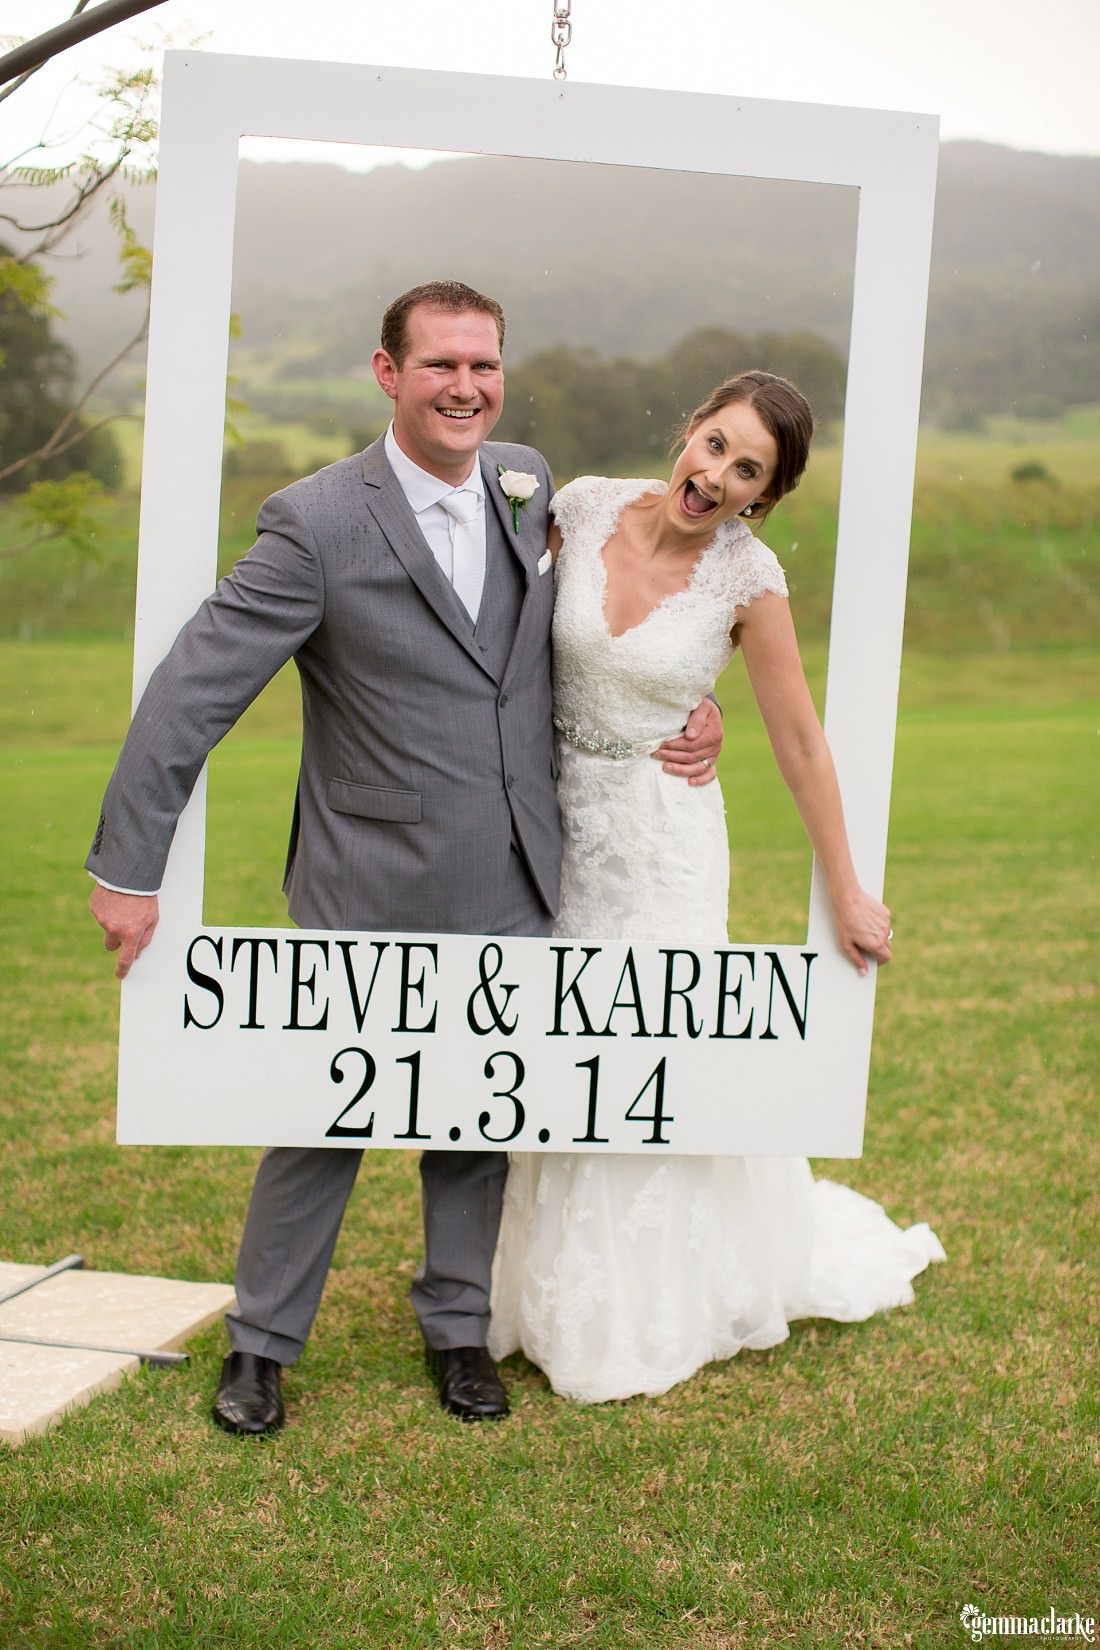 A bride and groom posing and smiling inside a large white "frame" - Silos Estate Wedding